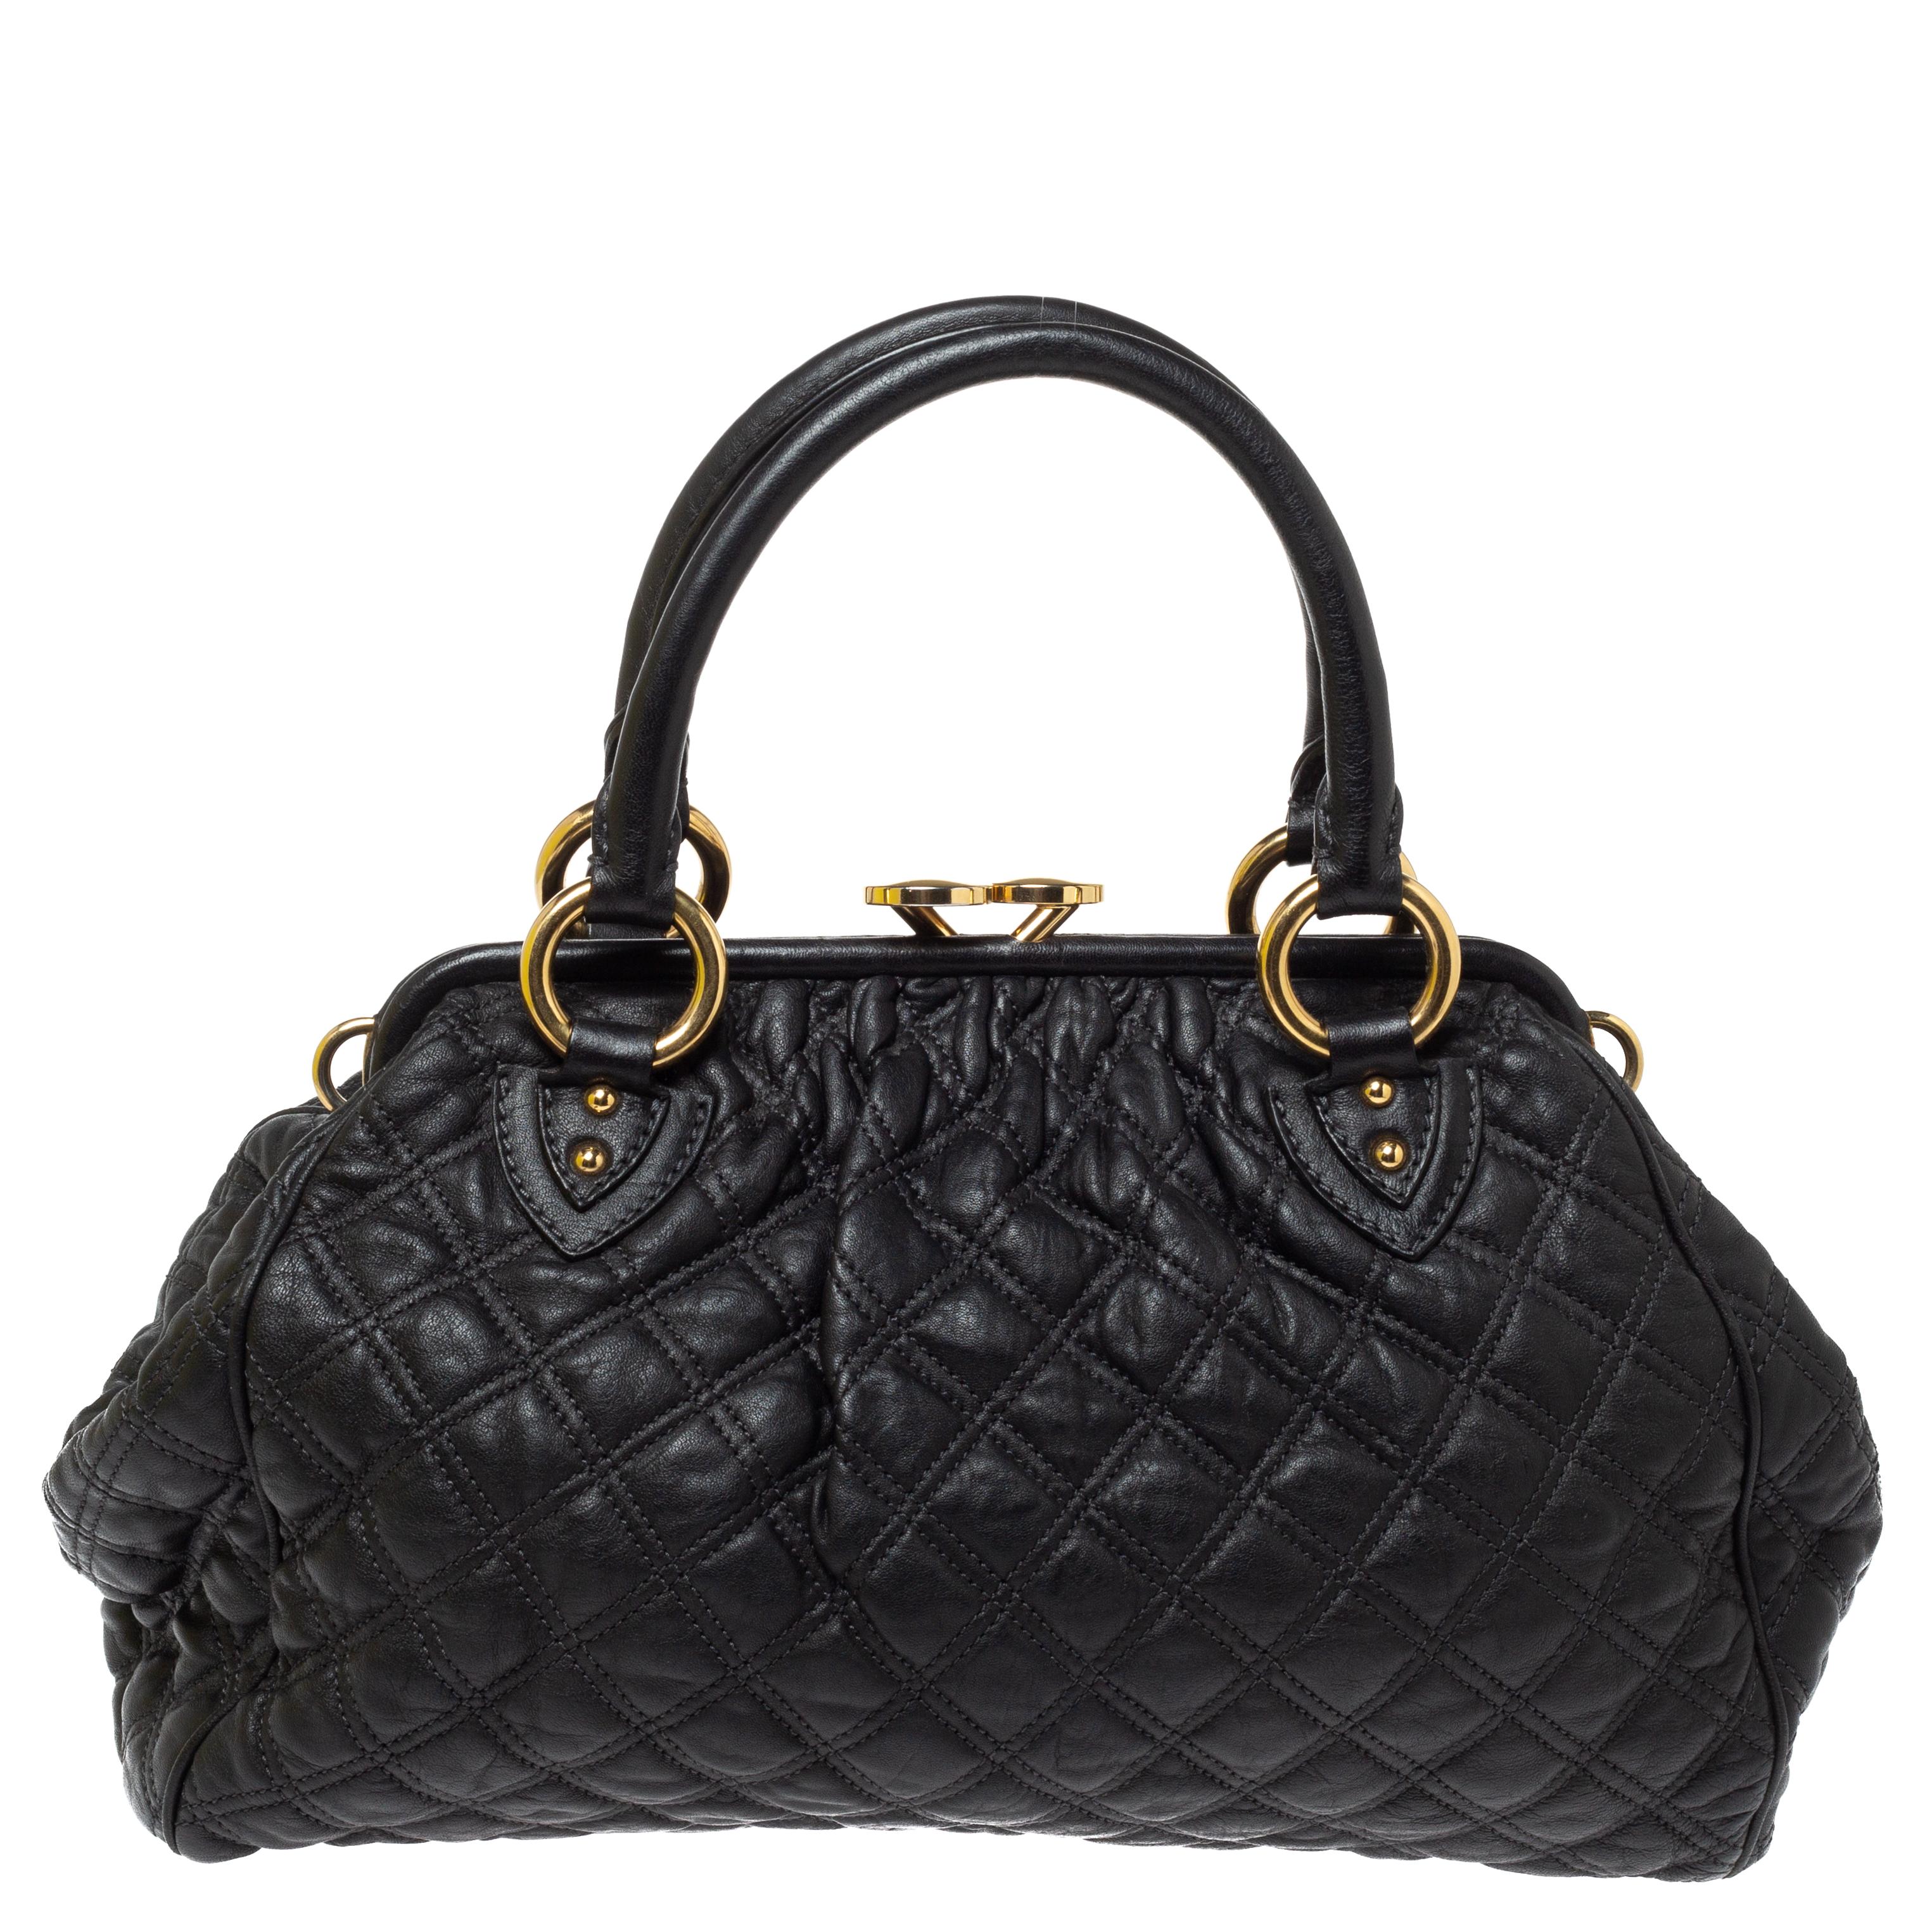 This Marc Jacobs design has a black quilted exterior crafted from leather and enhanced with gold-tone hardware. This elegant Stam bag features a kiss-lock top closure that opens to a canvas interior, dual top handles and a removable chain that